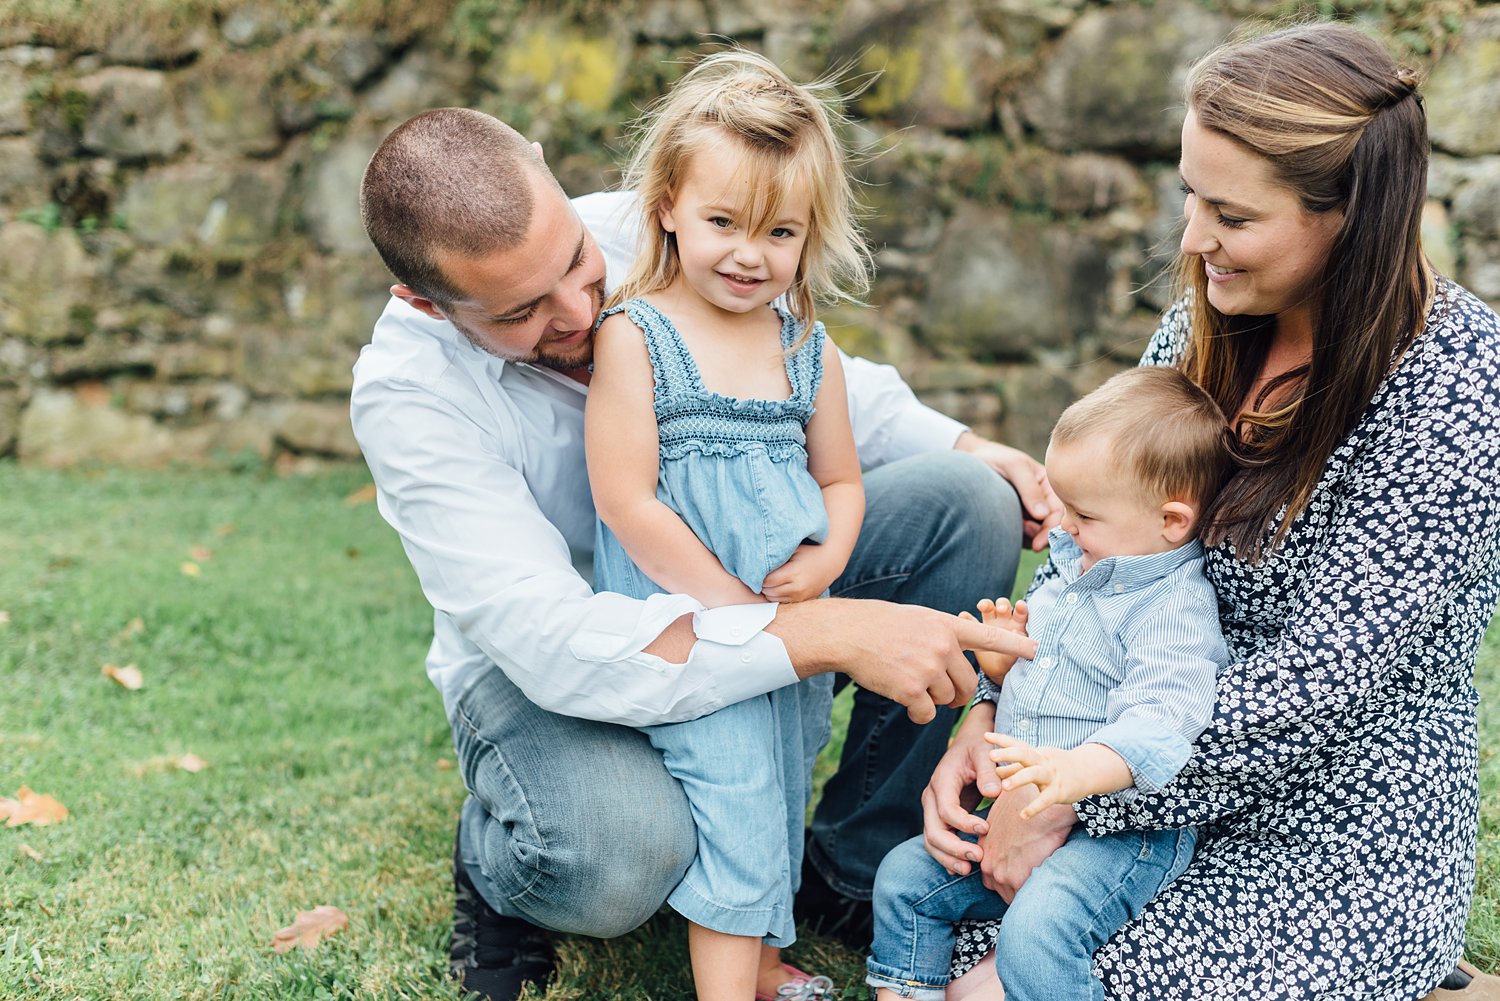 Haines Family - Chester Springs Family Session - Olney Family Photographer - Alison Dunn Photography photo